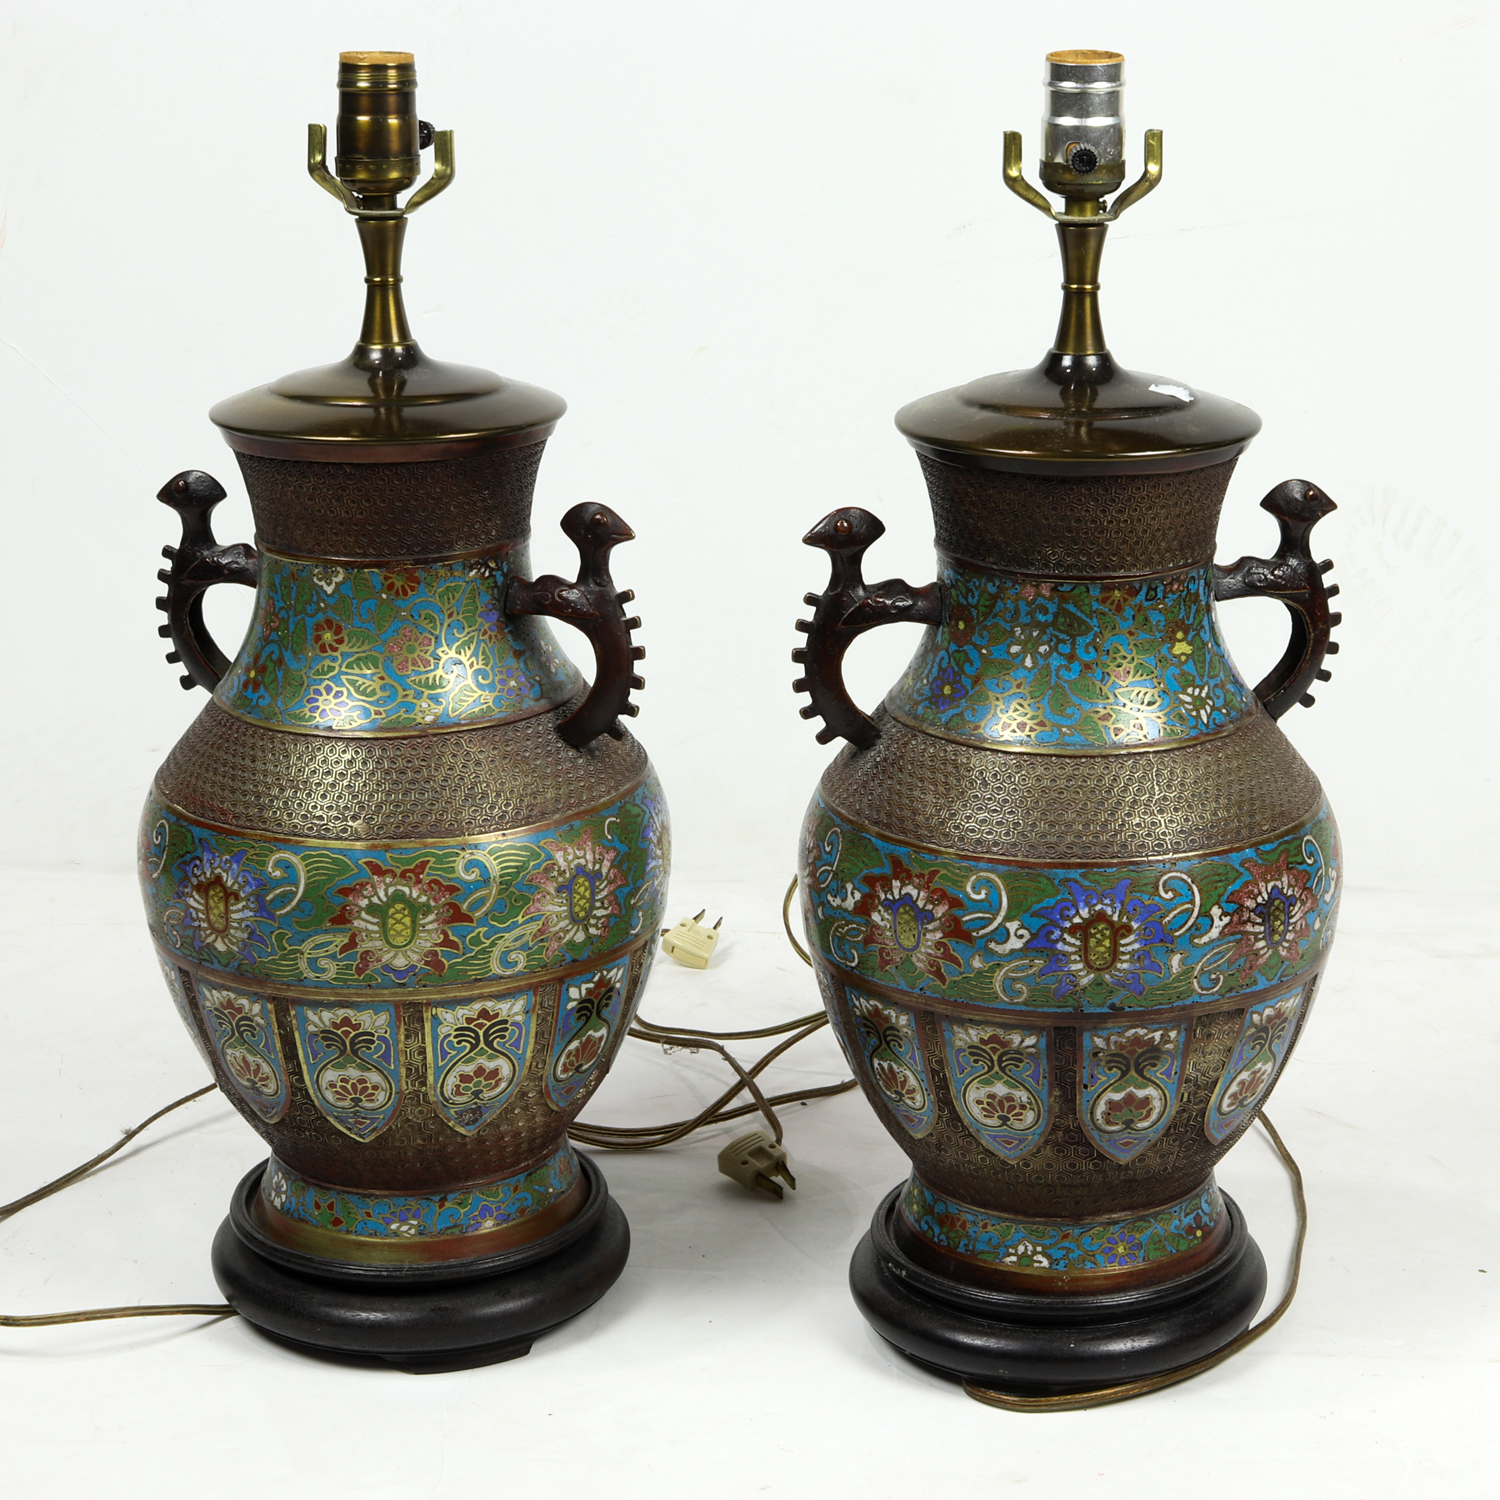 PAIR OF JAPANESE CHAMPLEVE VASES 3a506d